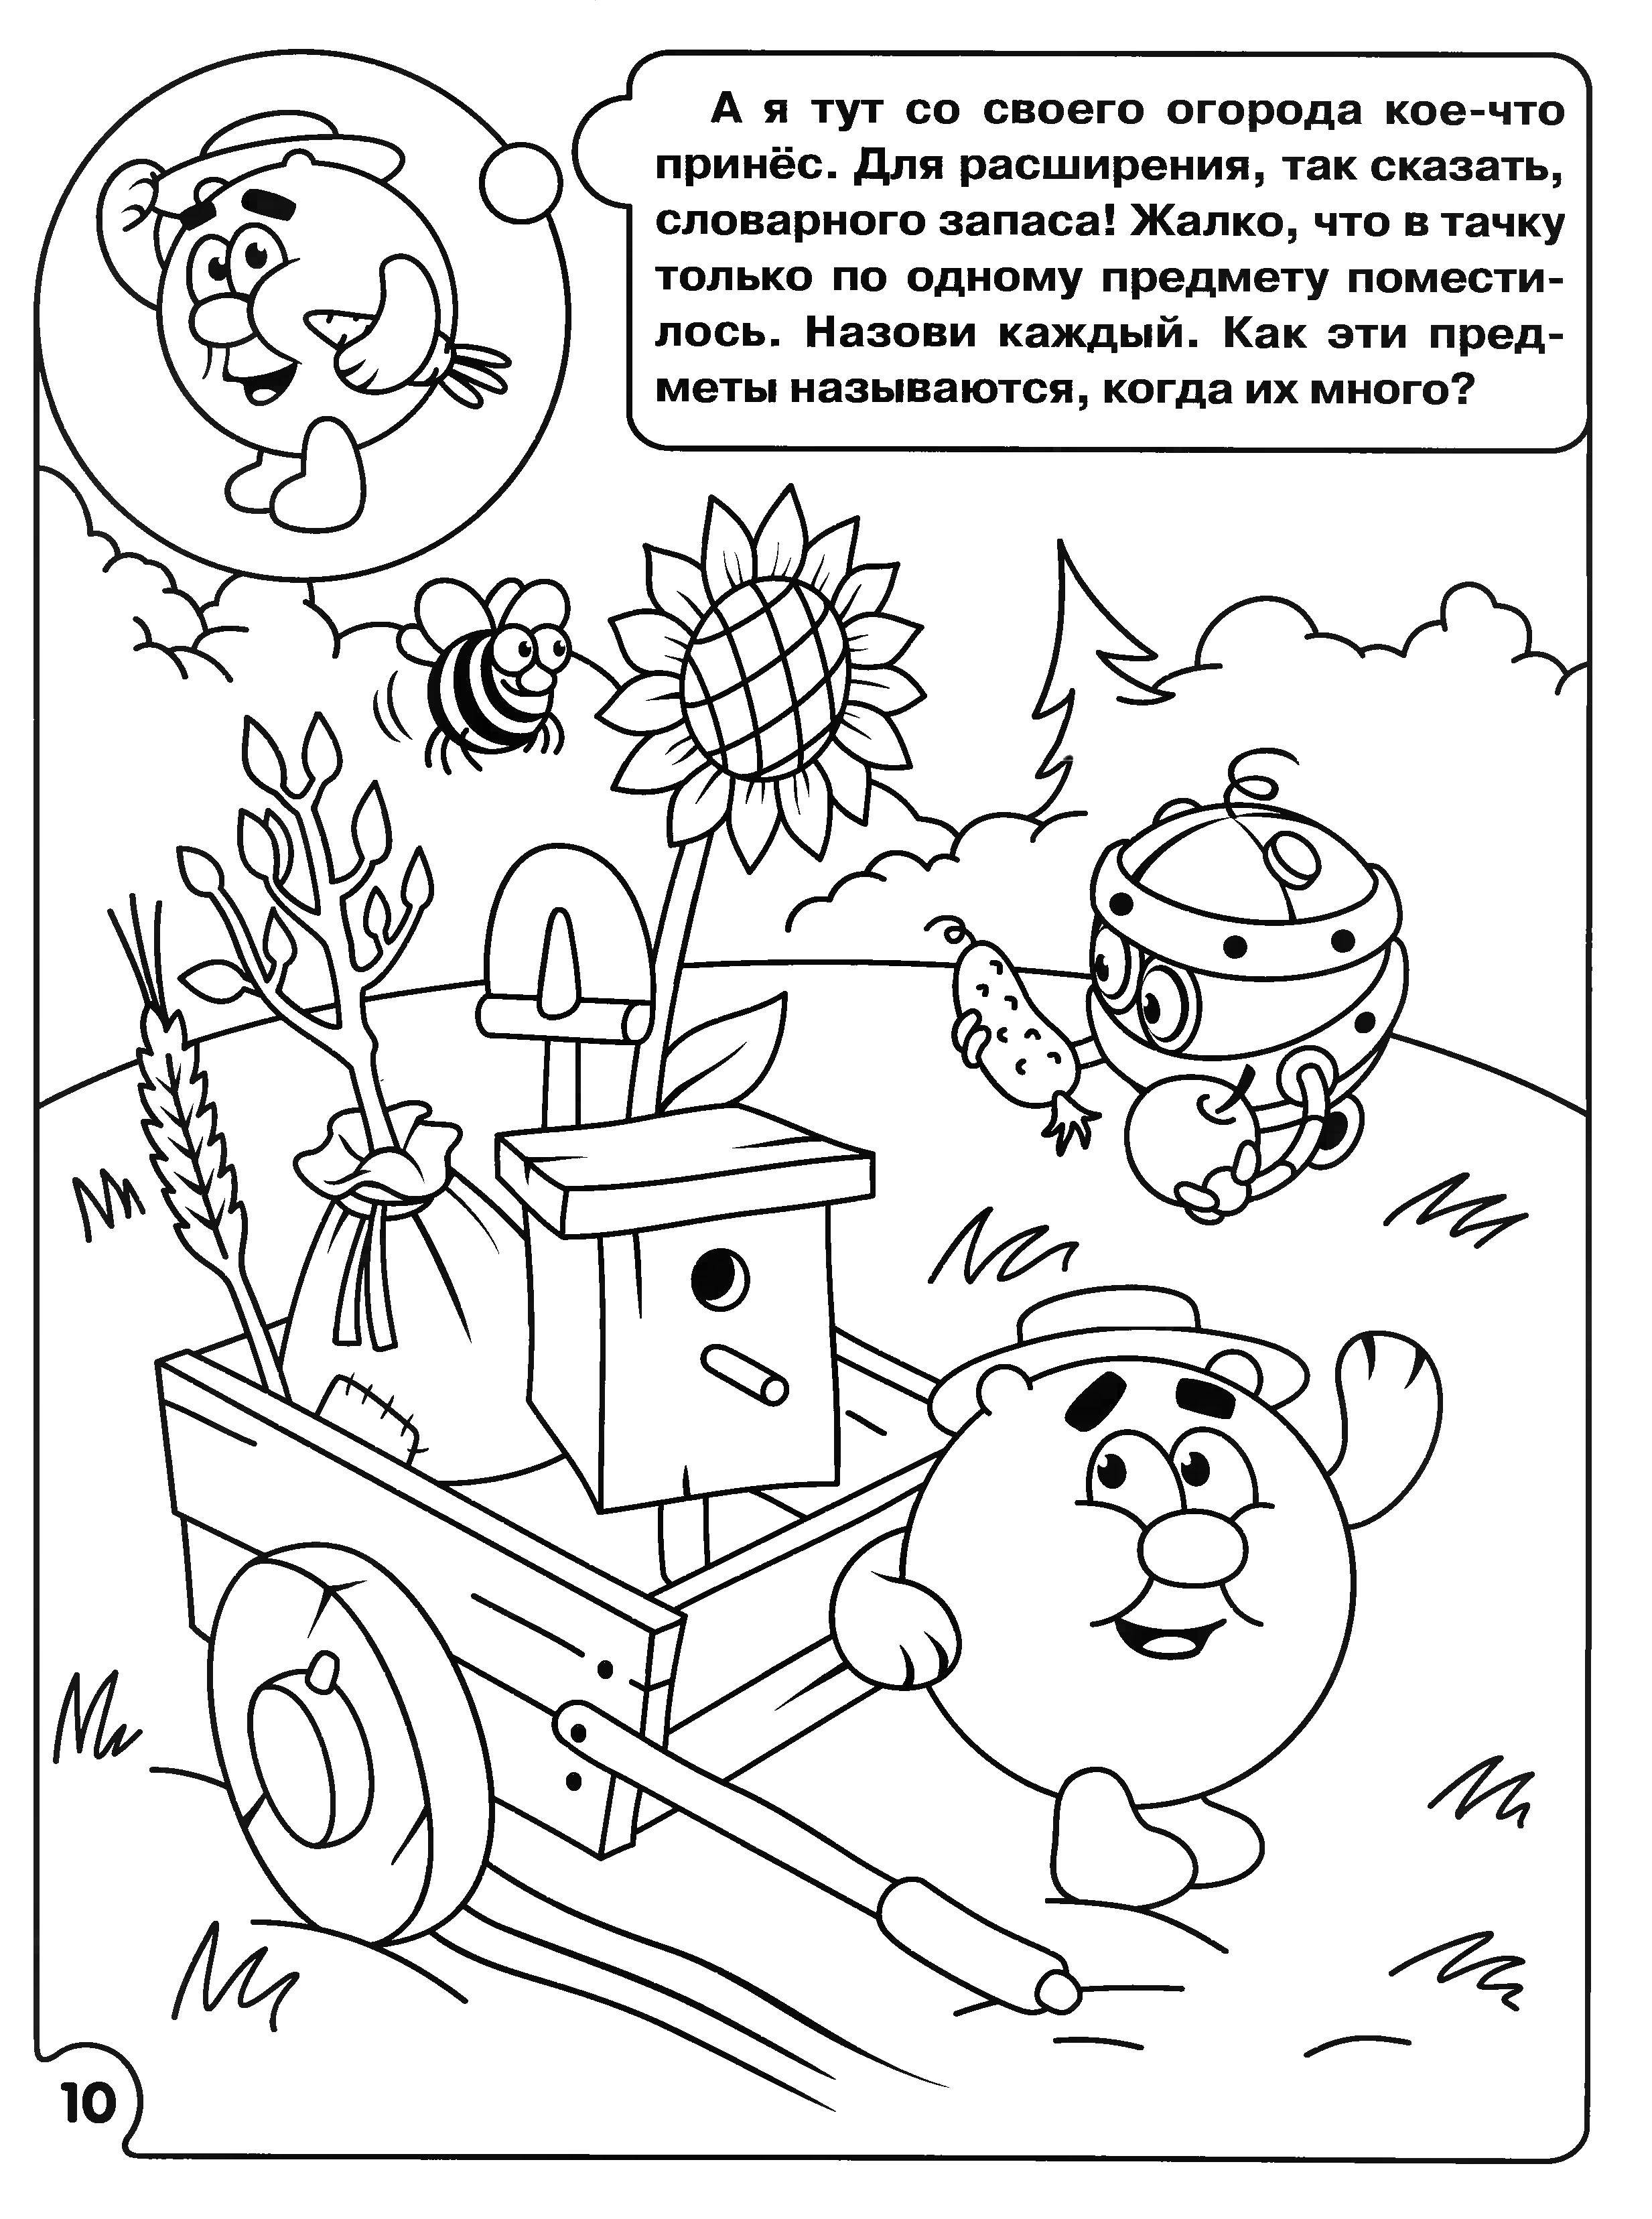 Coloring Coloring book-mystery. Category puzzles , coloring pages. Tags:  the mystery , thinking, logic.